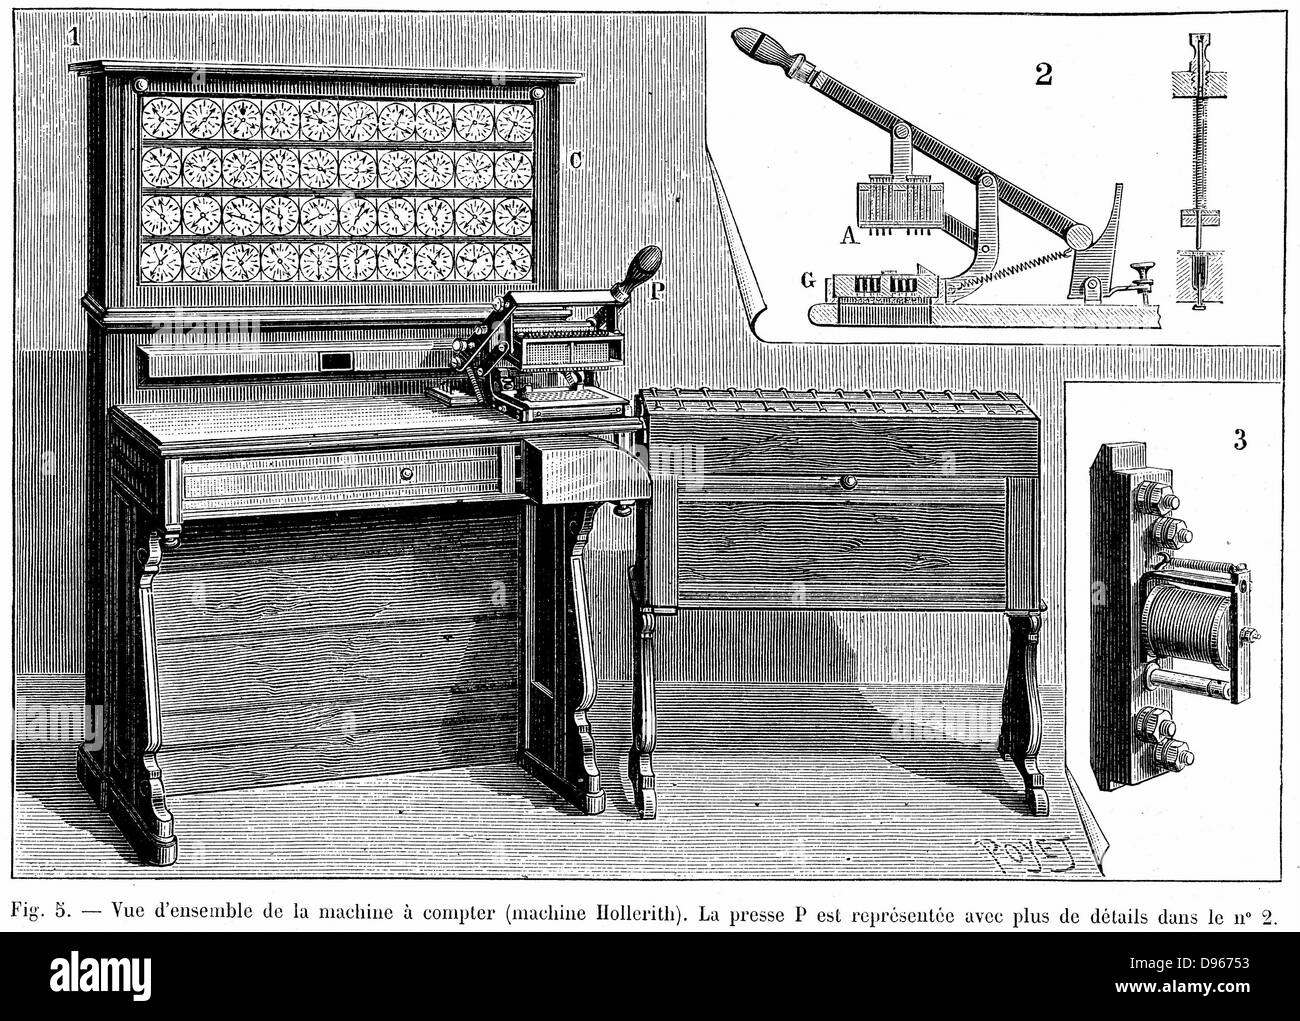 Hollerith tabulator which used a punched card memory system. First used in the US census of 1890. Engraving, Paris, 1894 Stock Photo